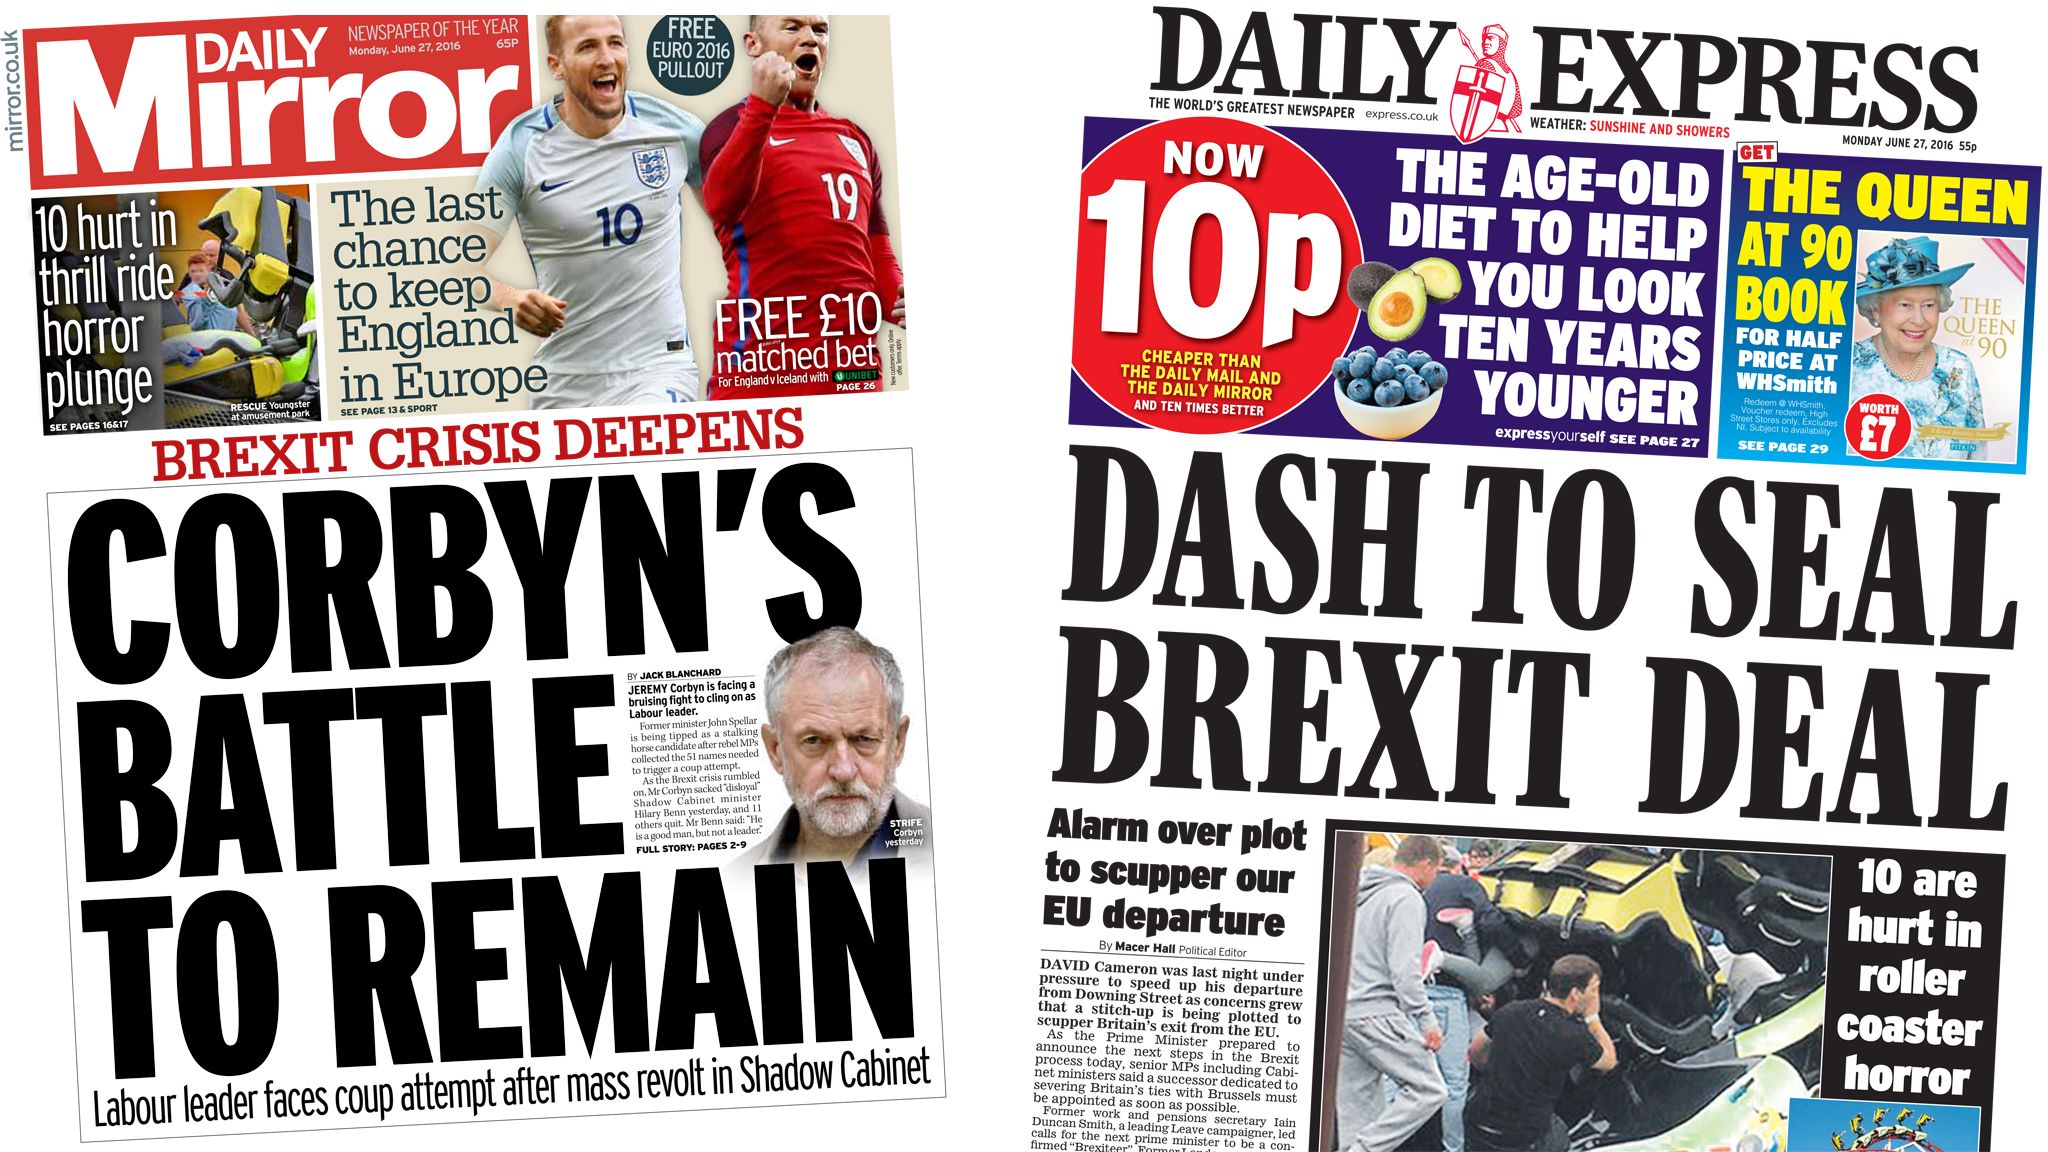 Daily Mirror, Daily Express front pages for 27/06/16